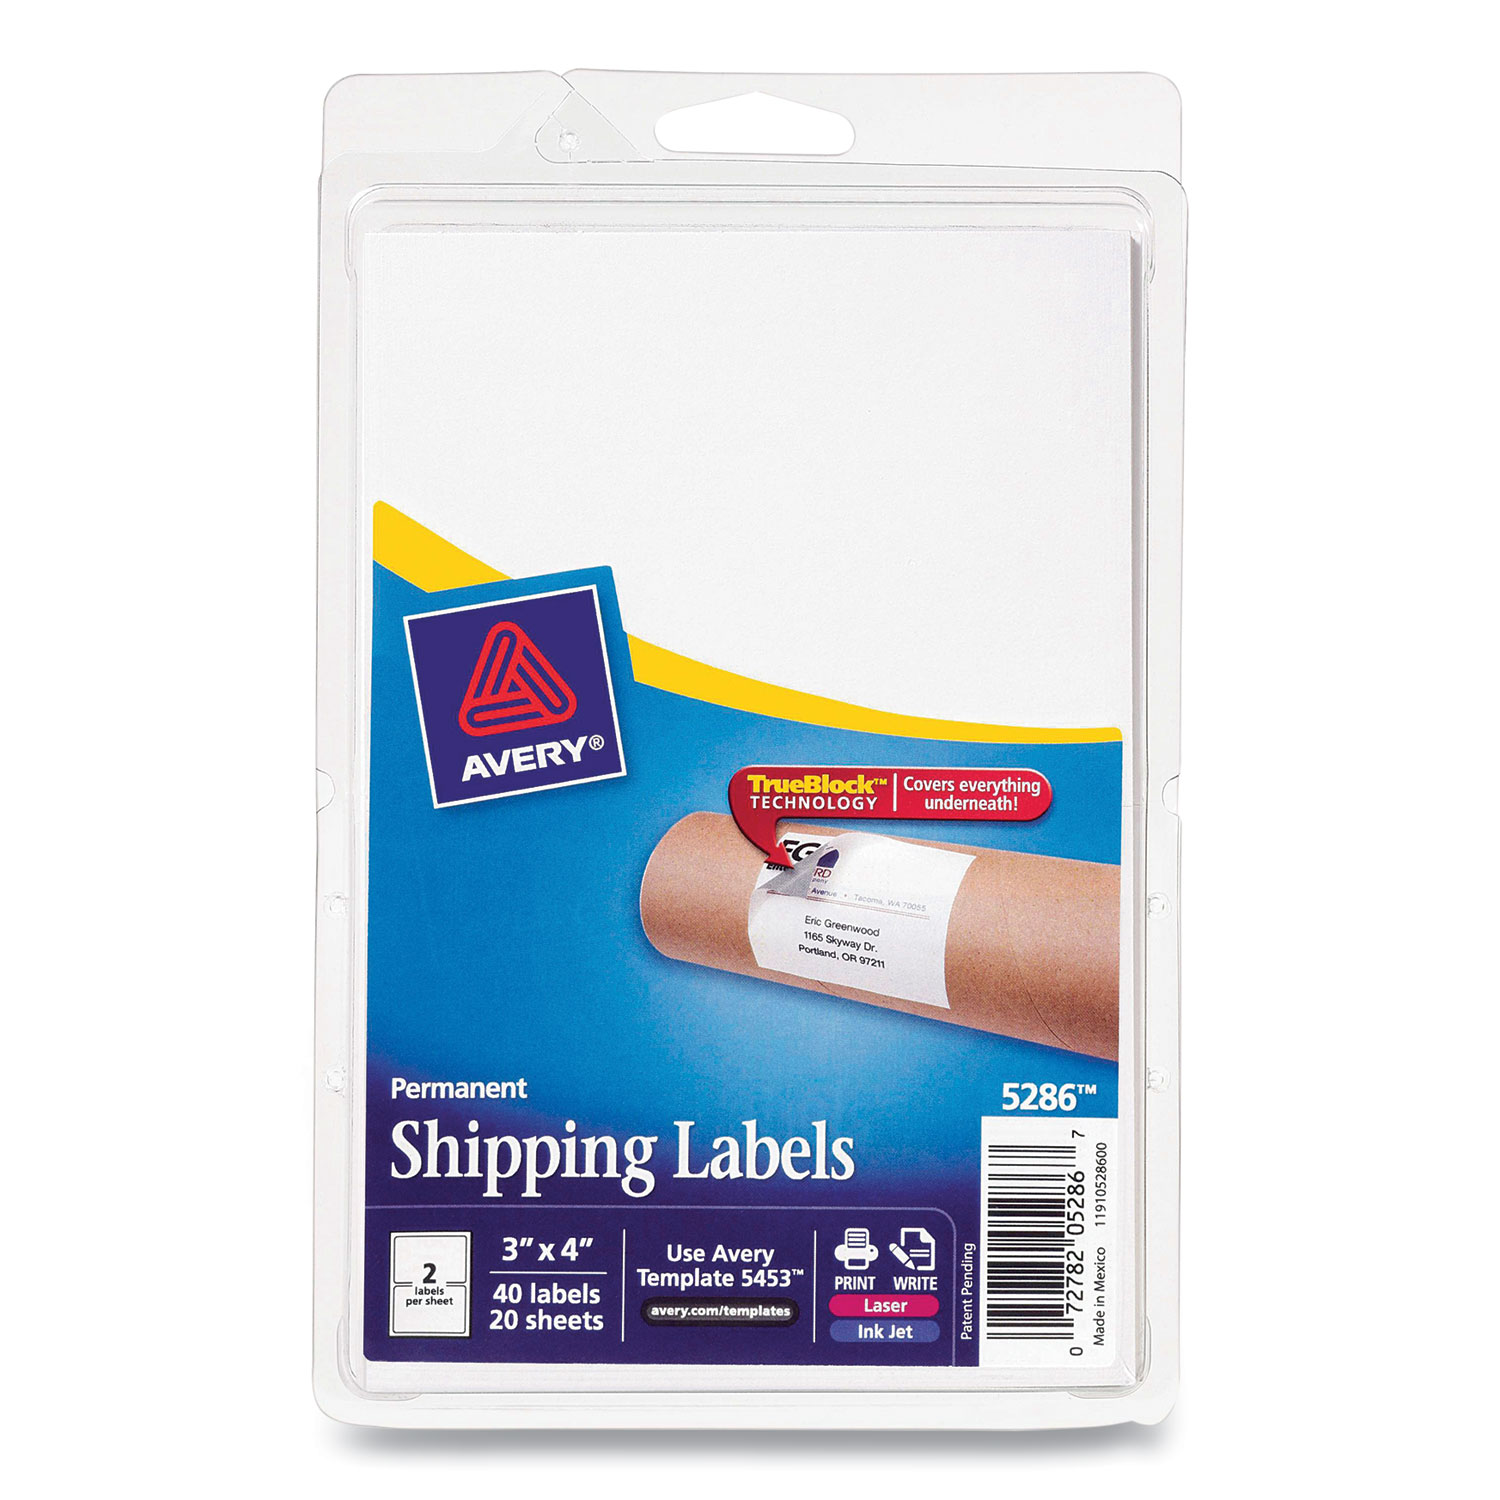  Avery 05286 Shipping Labels with TrueBlock Technology, Inkjet/Laser Printers, 4 x 3, White, 2/Sheet, 20 Sheets/Pack (AVE864677) 